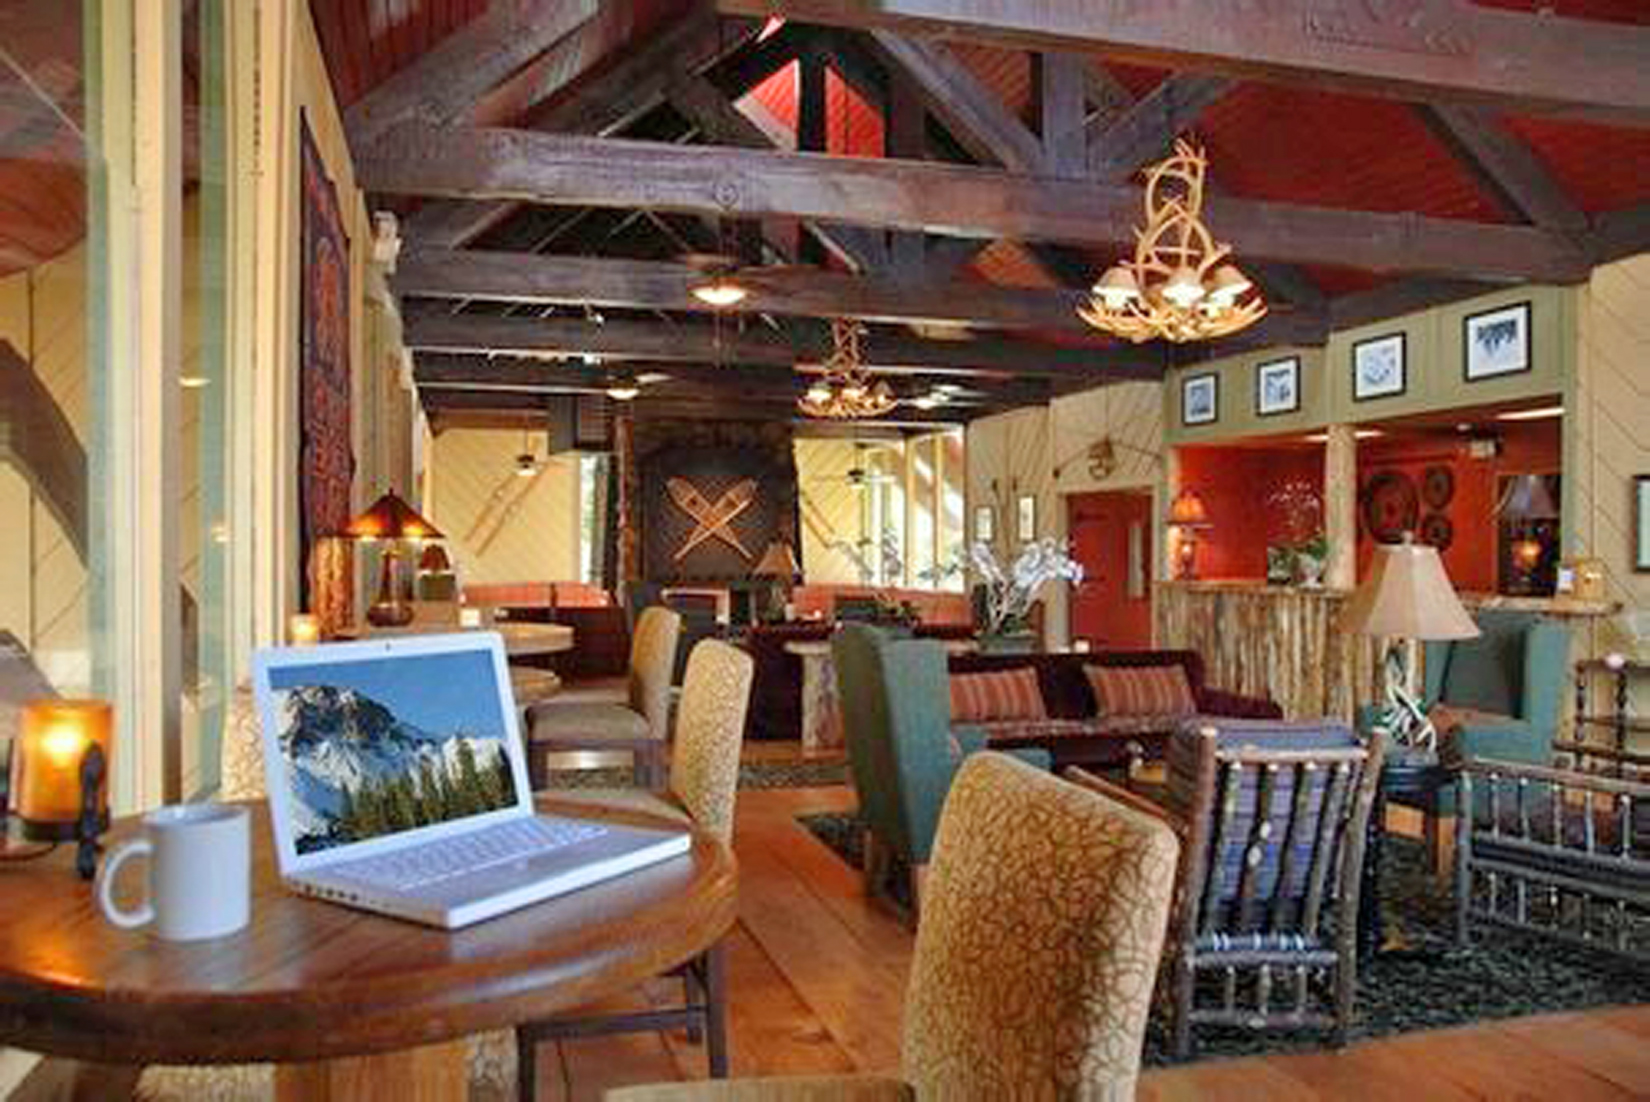 With classic Sierras ski haus styling, the Sierra Nevada Resort & Spa offers guest convenient in-town digs and a “California’s Best Ski Resorts and Inns” experience.